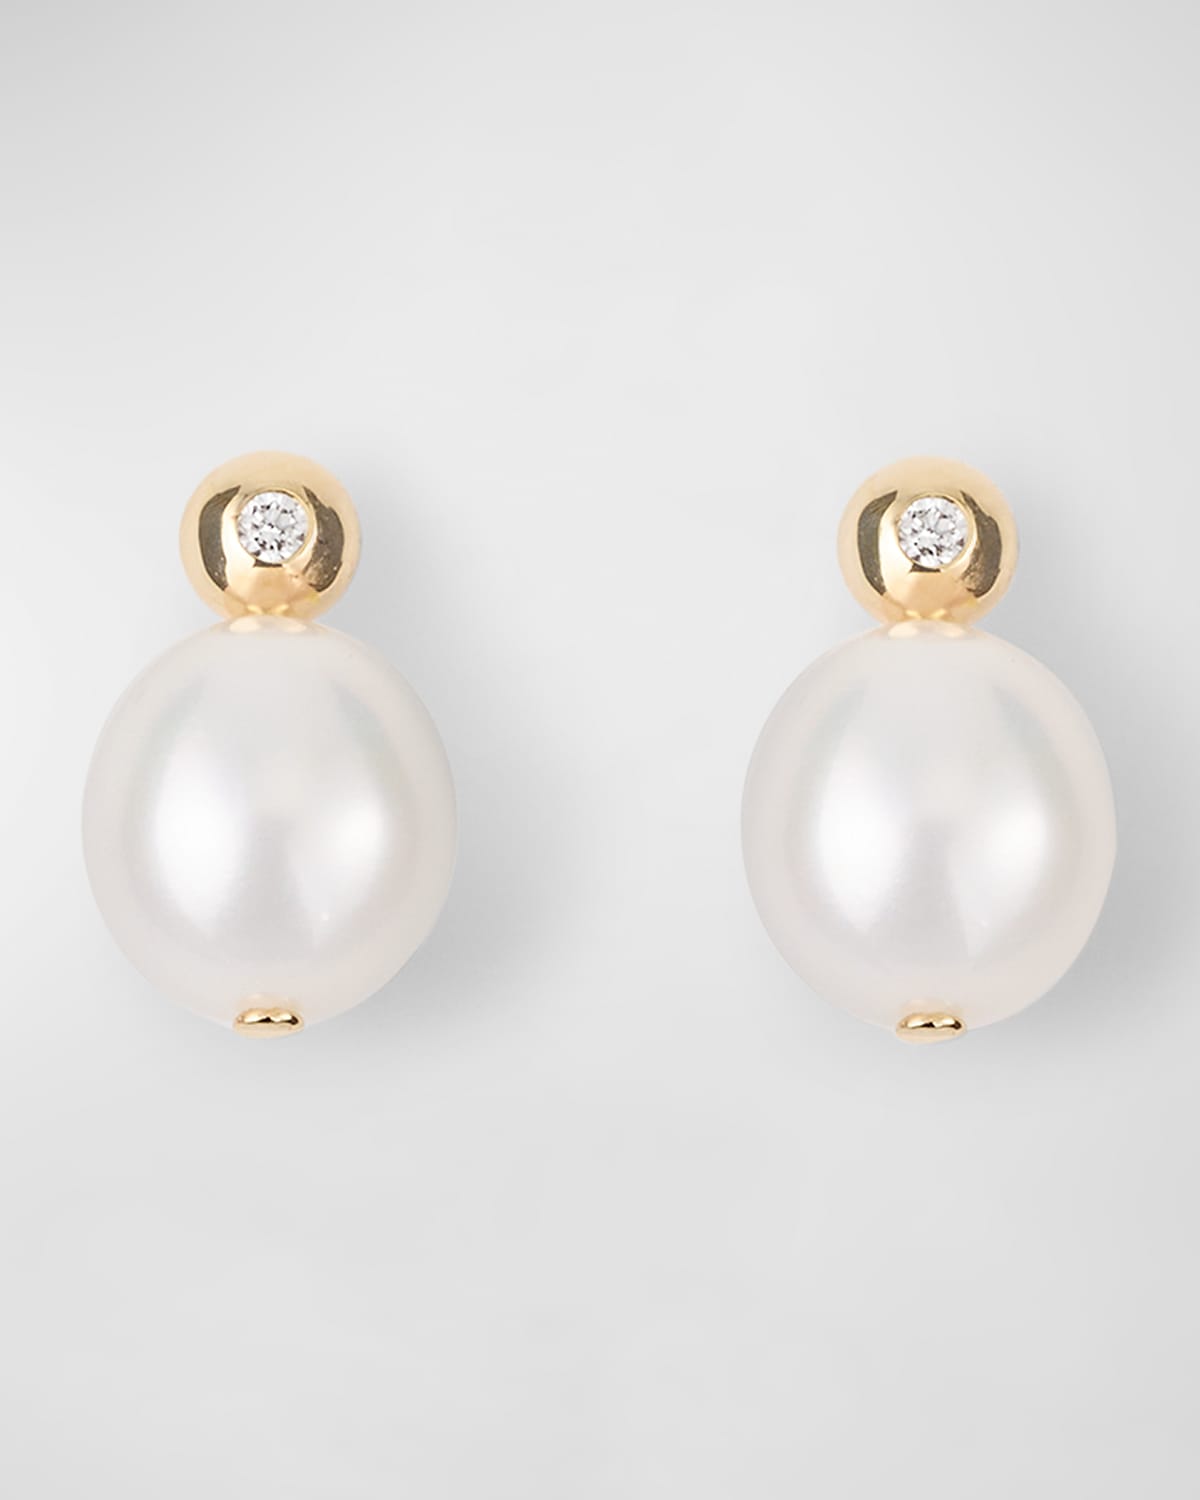 Poppy Finch Gold Dome Diamond And Pearl Stud Earrings